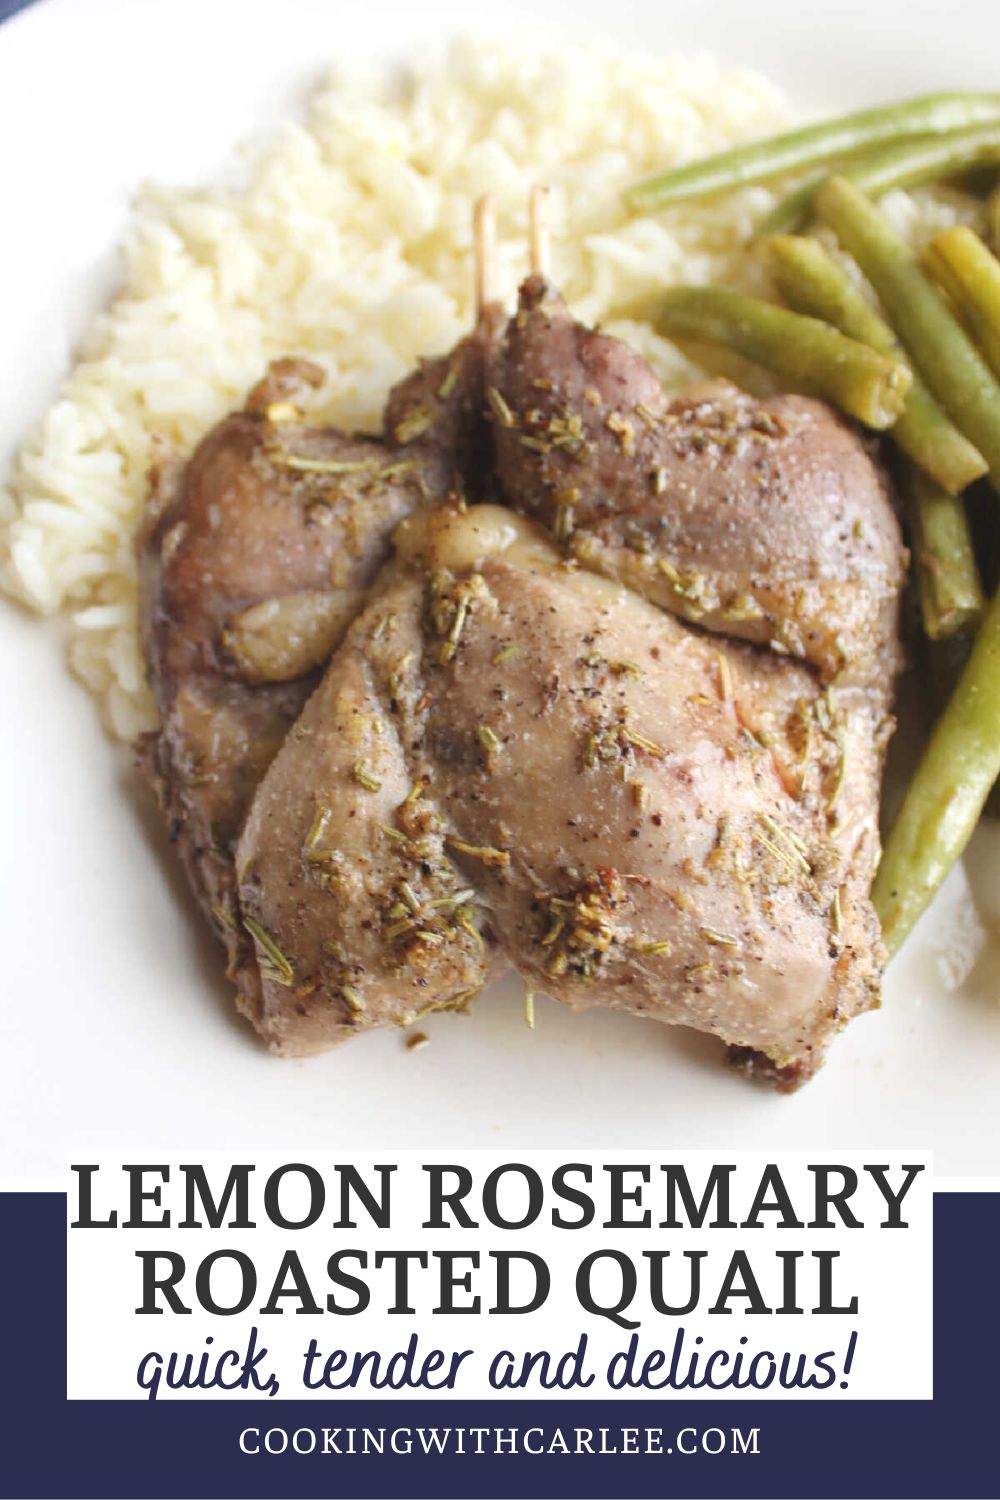 Lemon rosemary roasted quail has big flavor and only takes 12-15 minutes in the oven. This recipe will help you to cook a tender and delicious meal from the small birds.